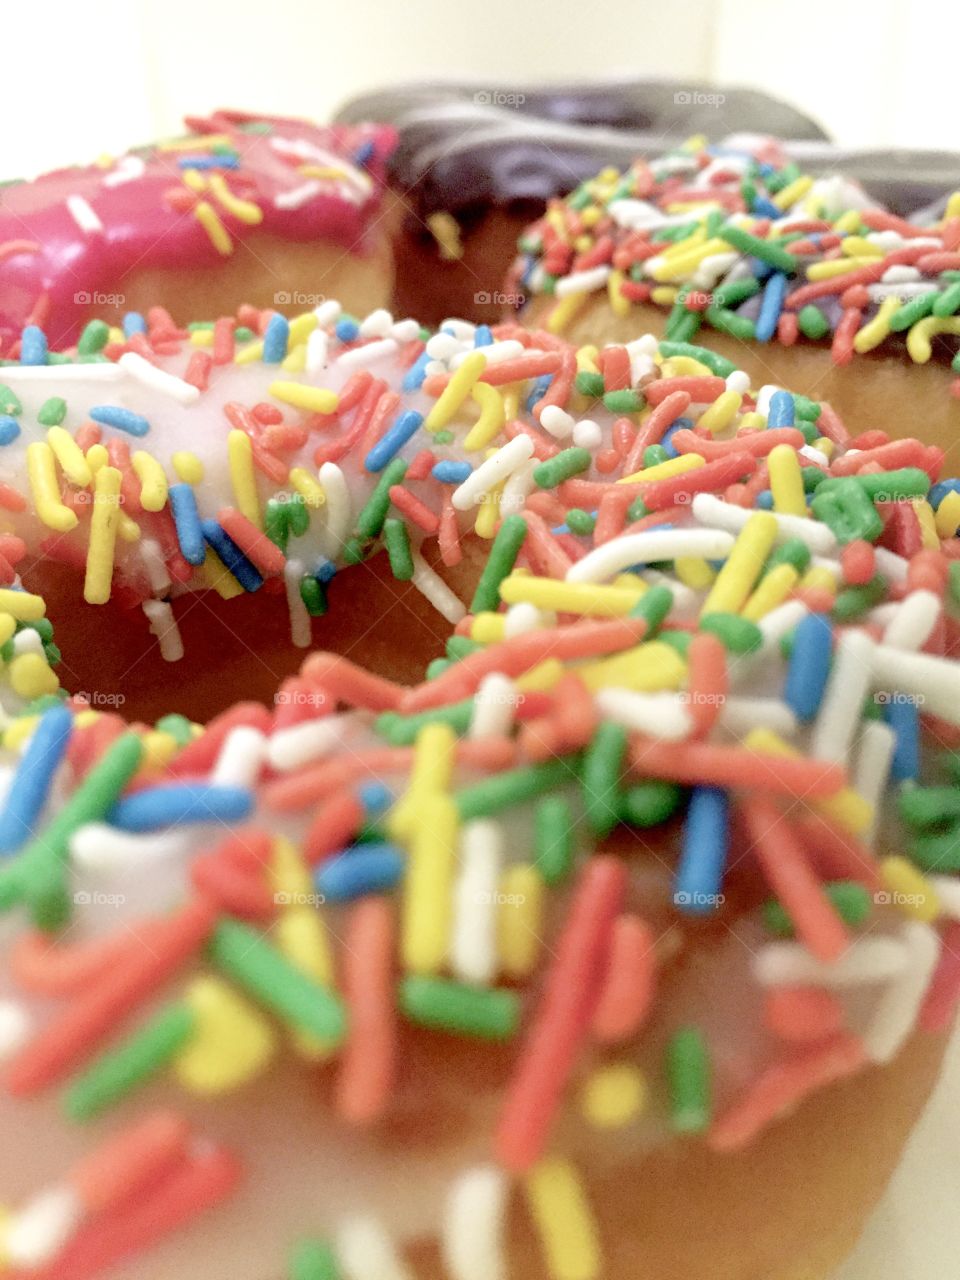 Donut with colorful sprinkles